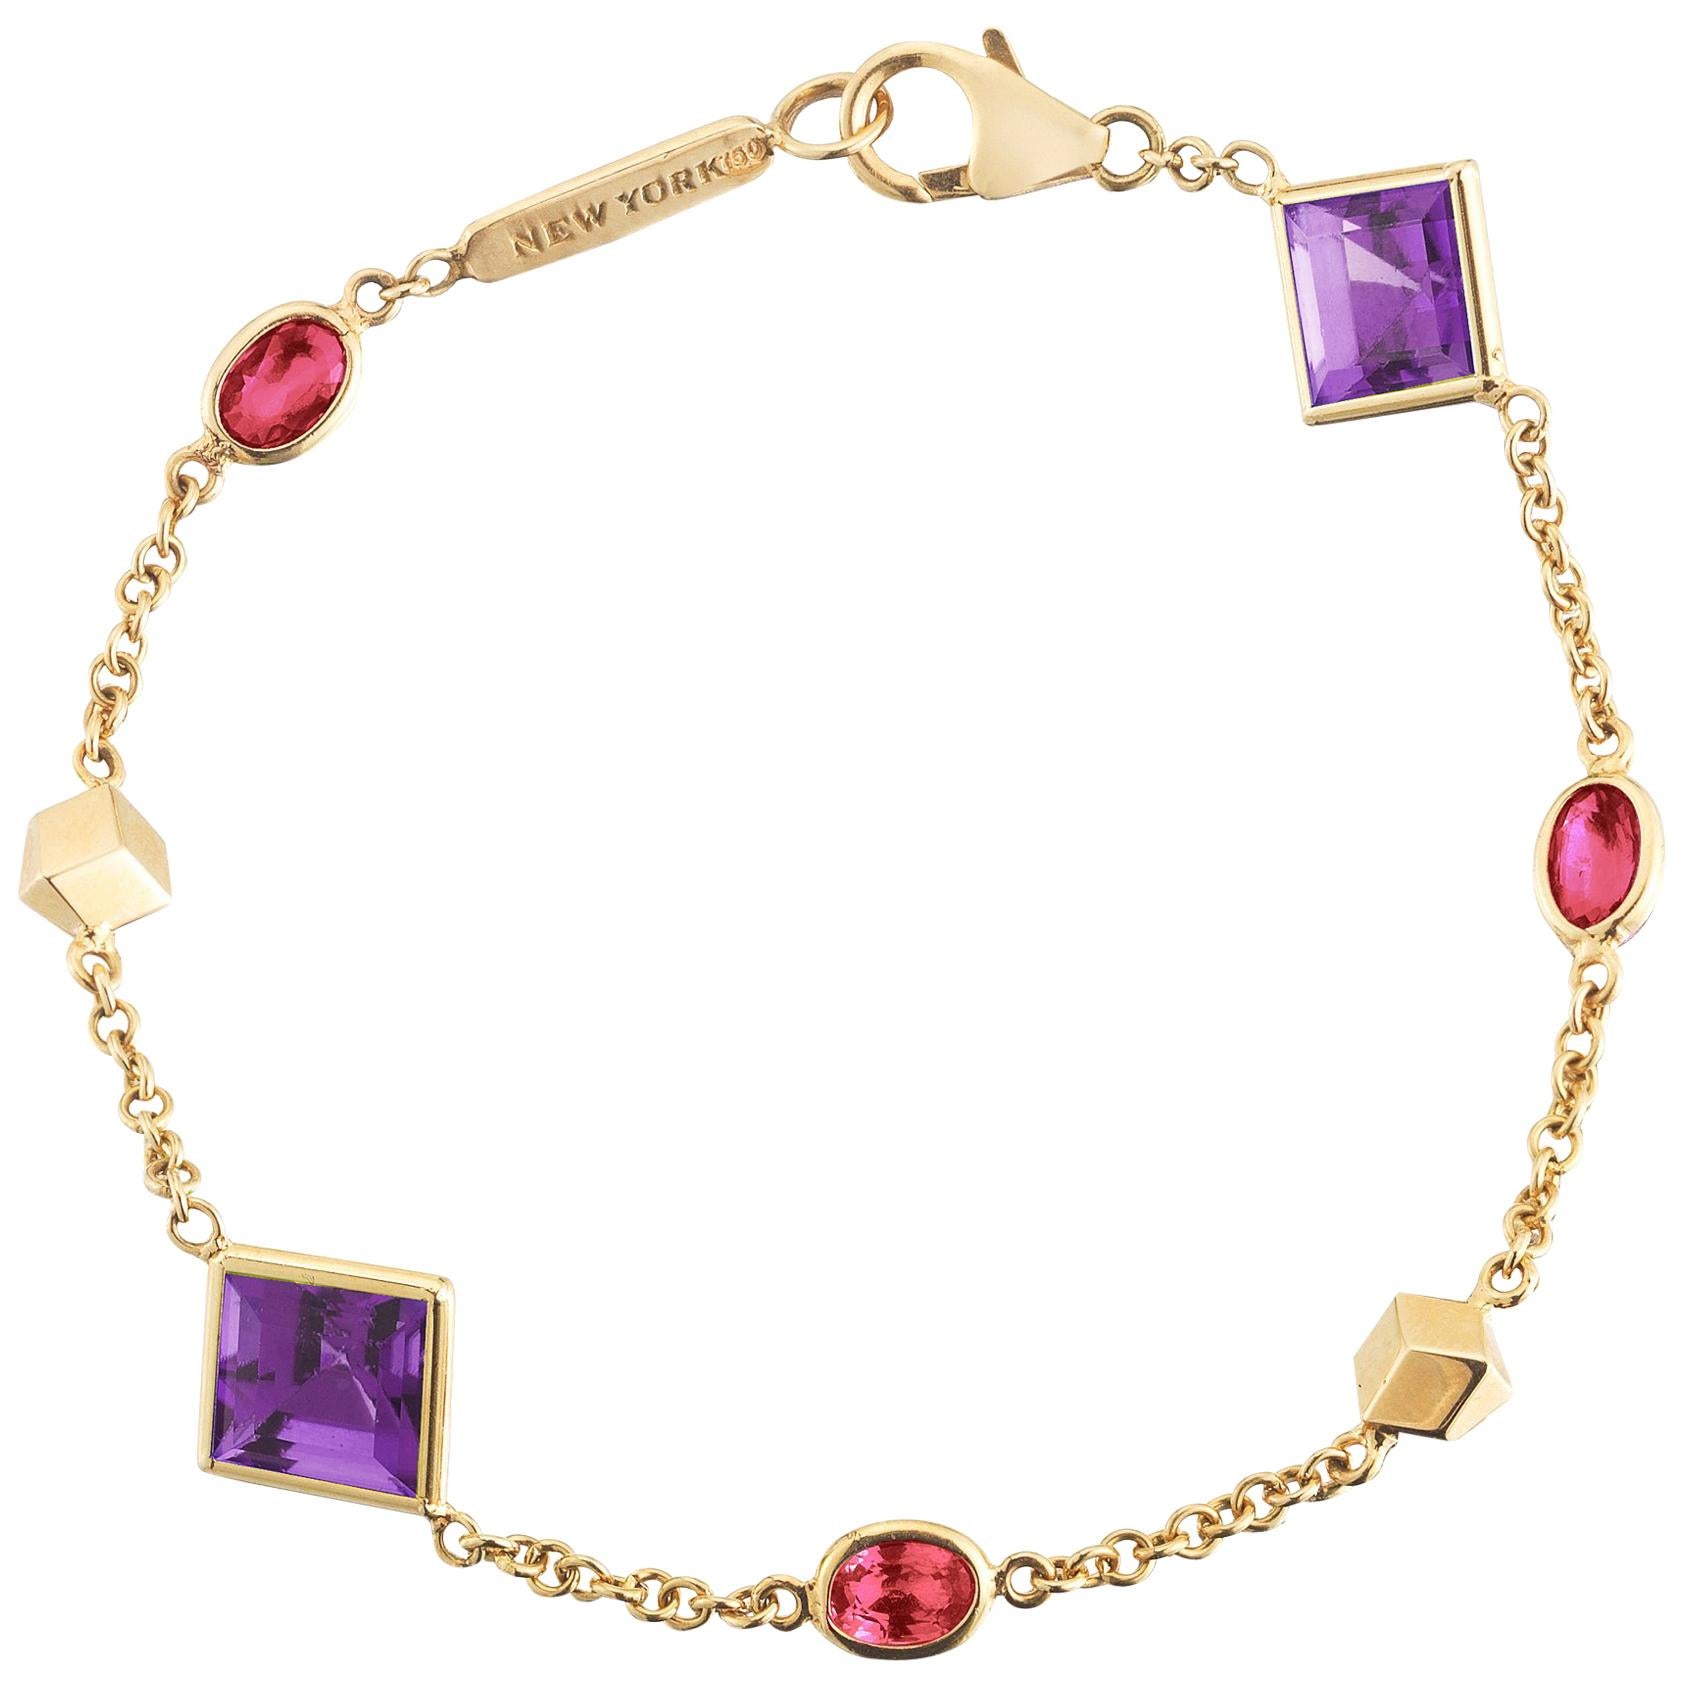 Paolo Costagli 18 Karat Yellow Gold Florentine Bracelet with Amethyst and Rubies im Angebot